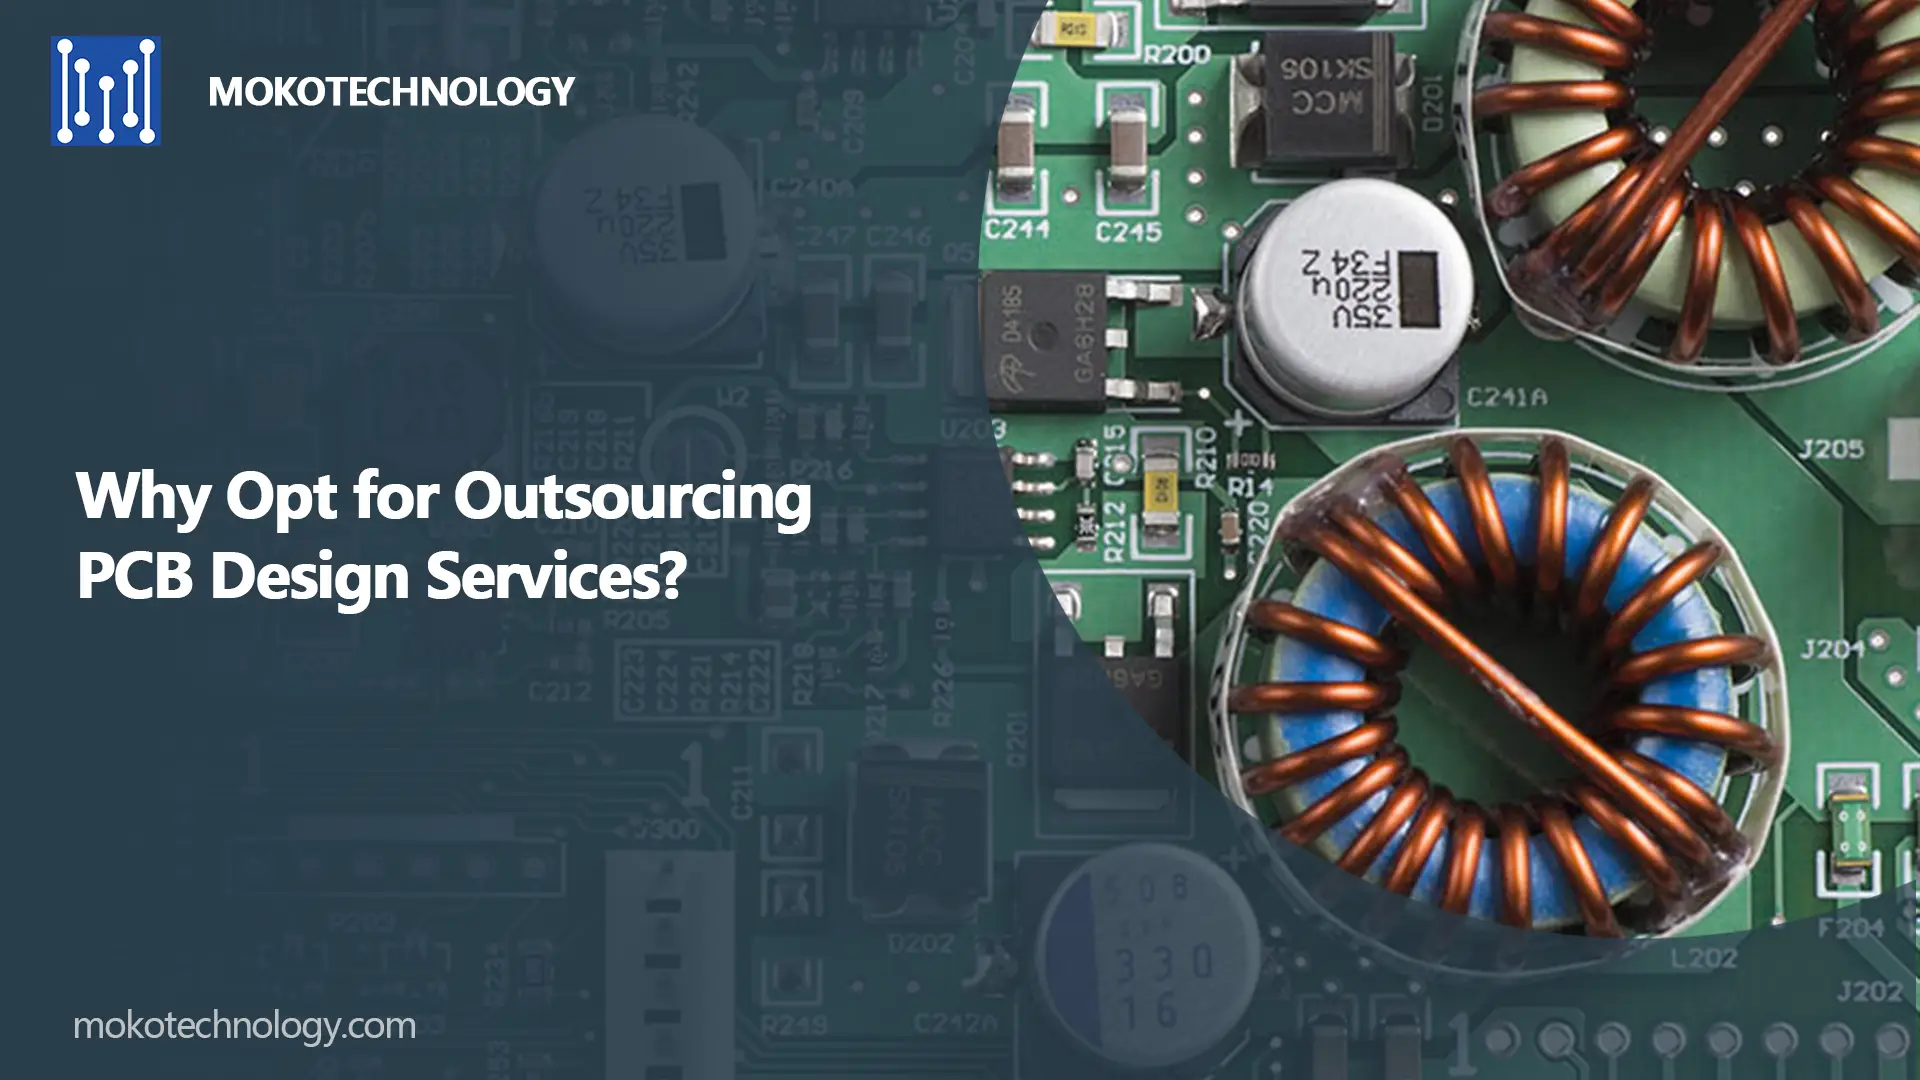 Why Opt for Outsourcing PCB Design Services